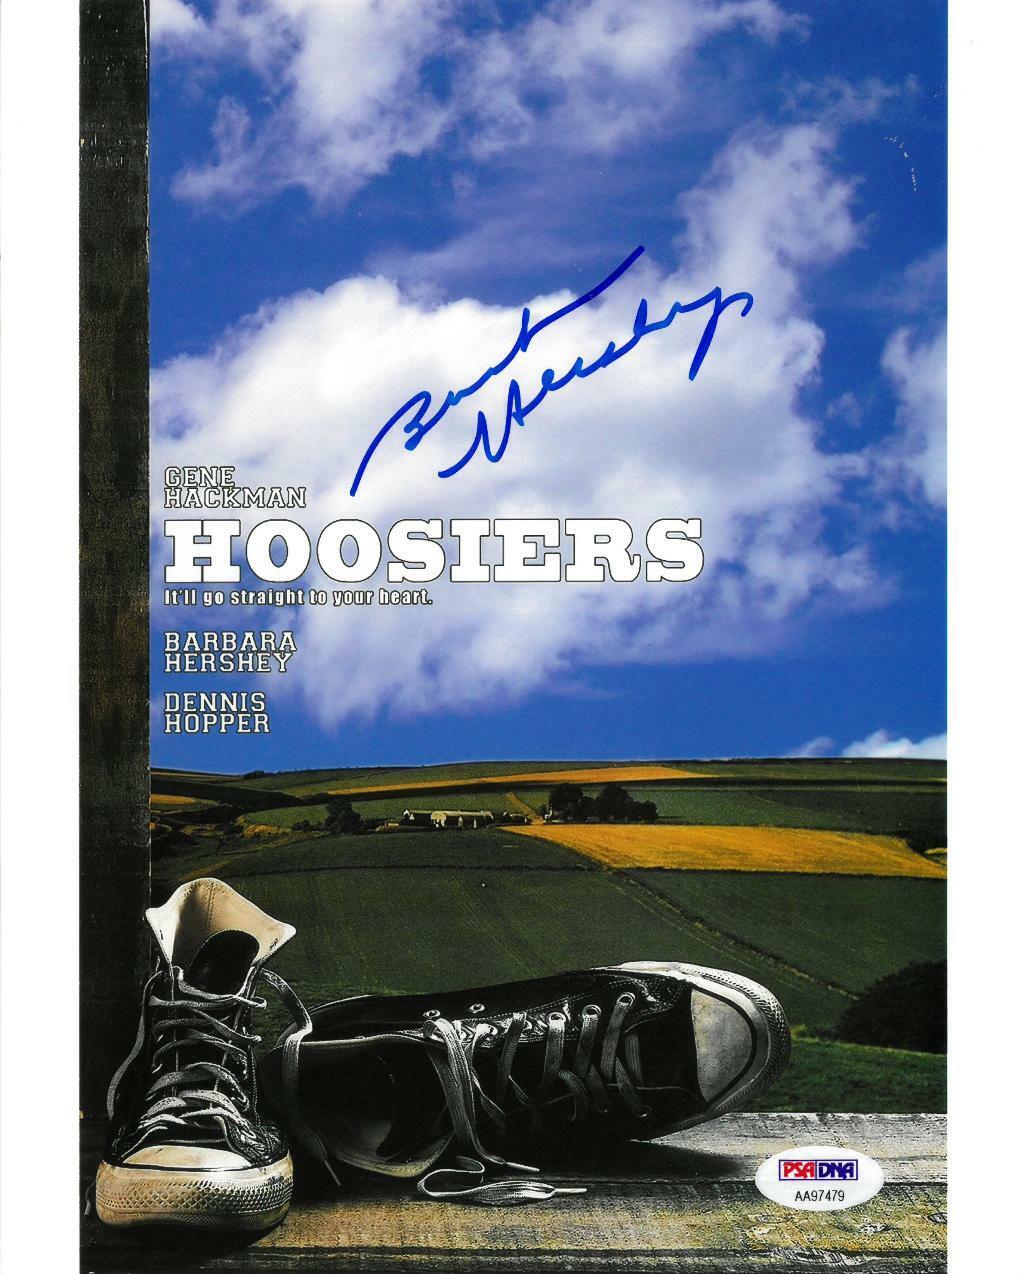 Barbara Hershey Signed Hoosiers Autographed 8x10 Photo Poster painting PSA/DNA #AA97479